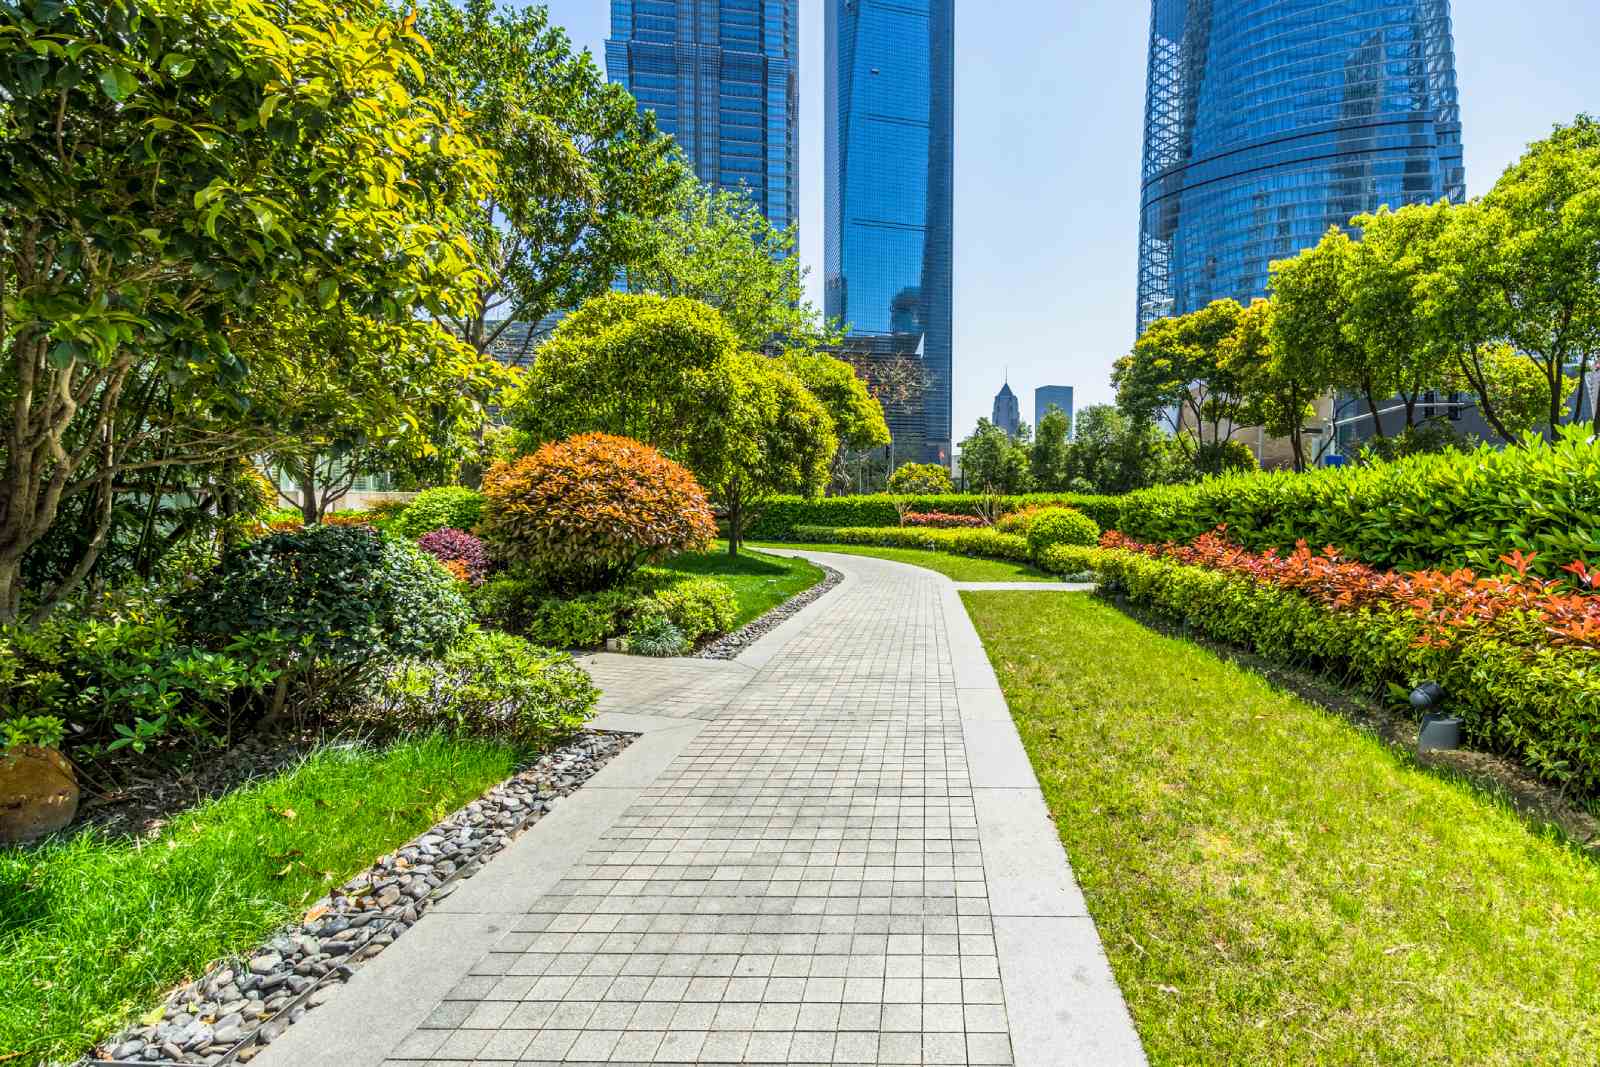 Commercial Landscaping Services